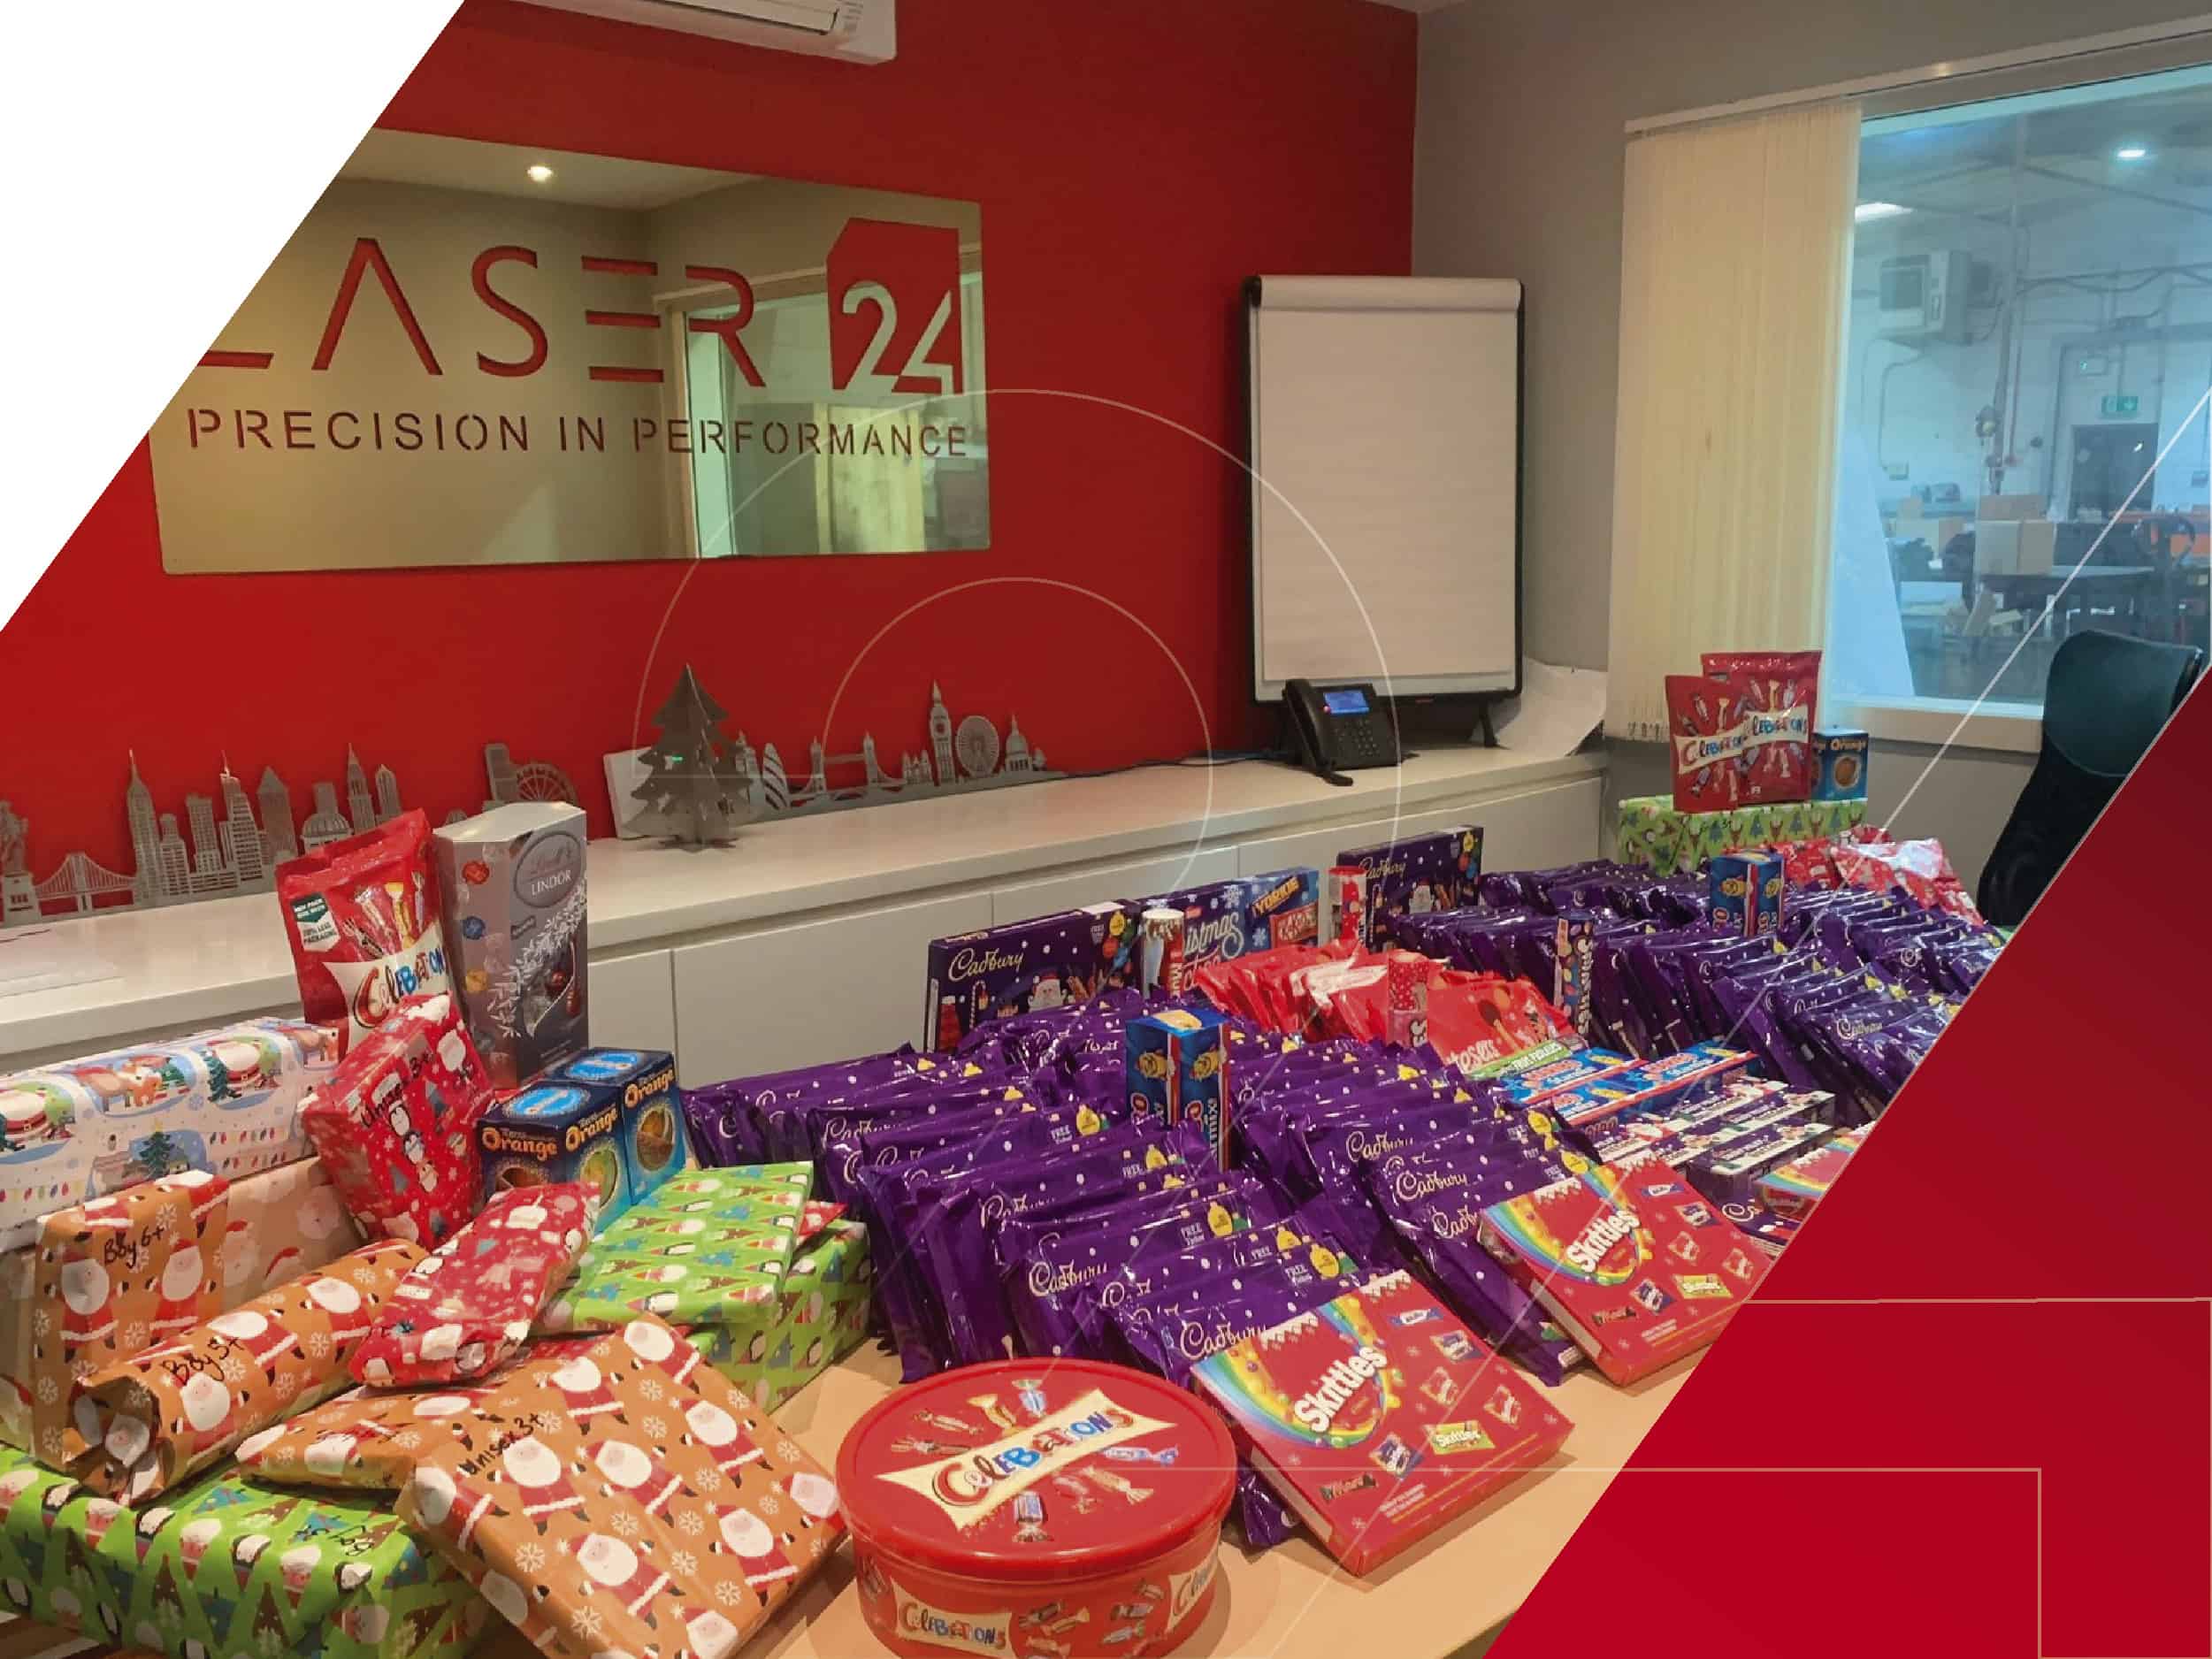 Laser 24 table full of gifts and chocolate for charity